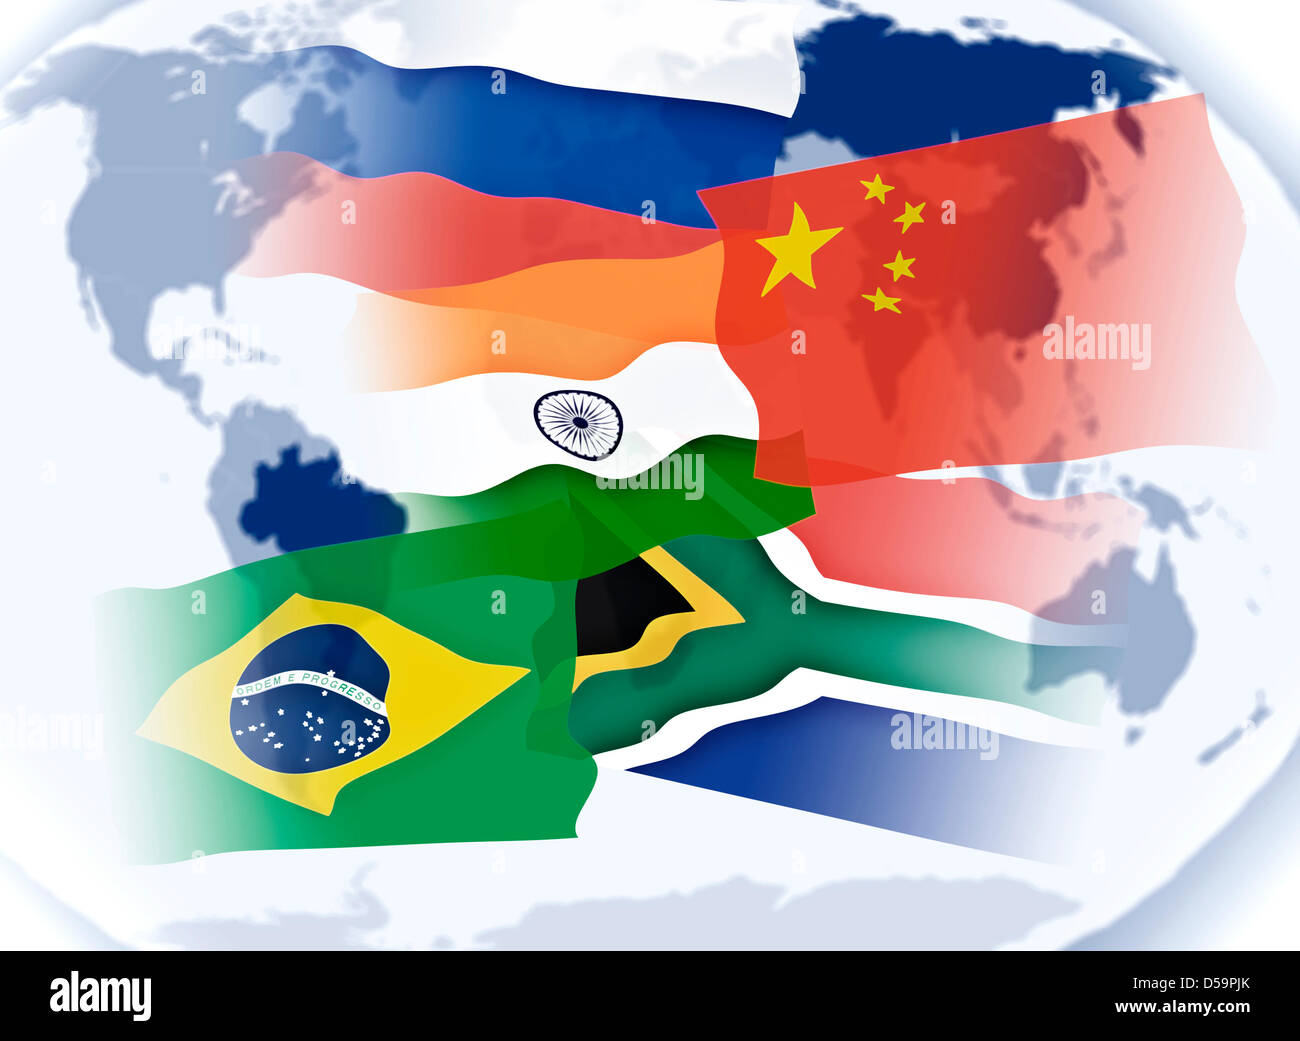 Illustration on BRICS States with national flags and world map Stock Photo